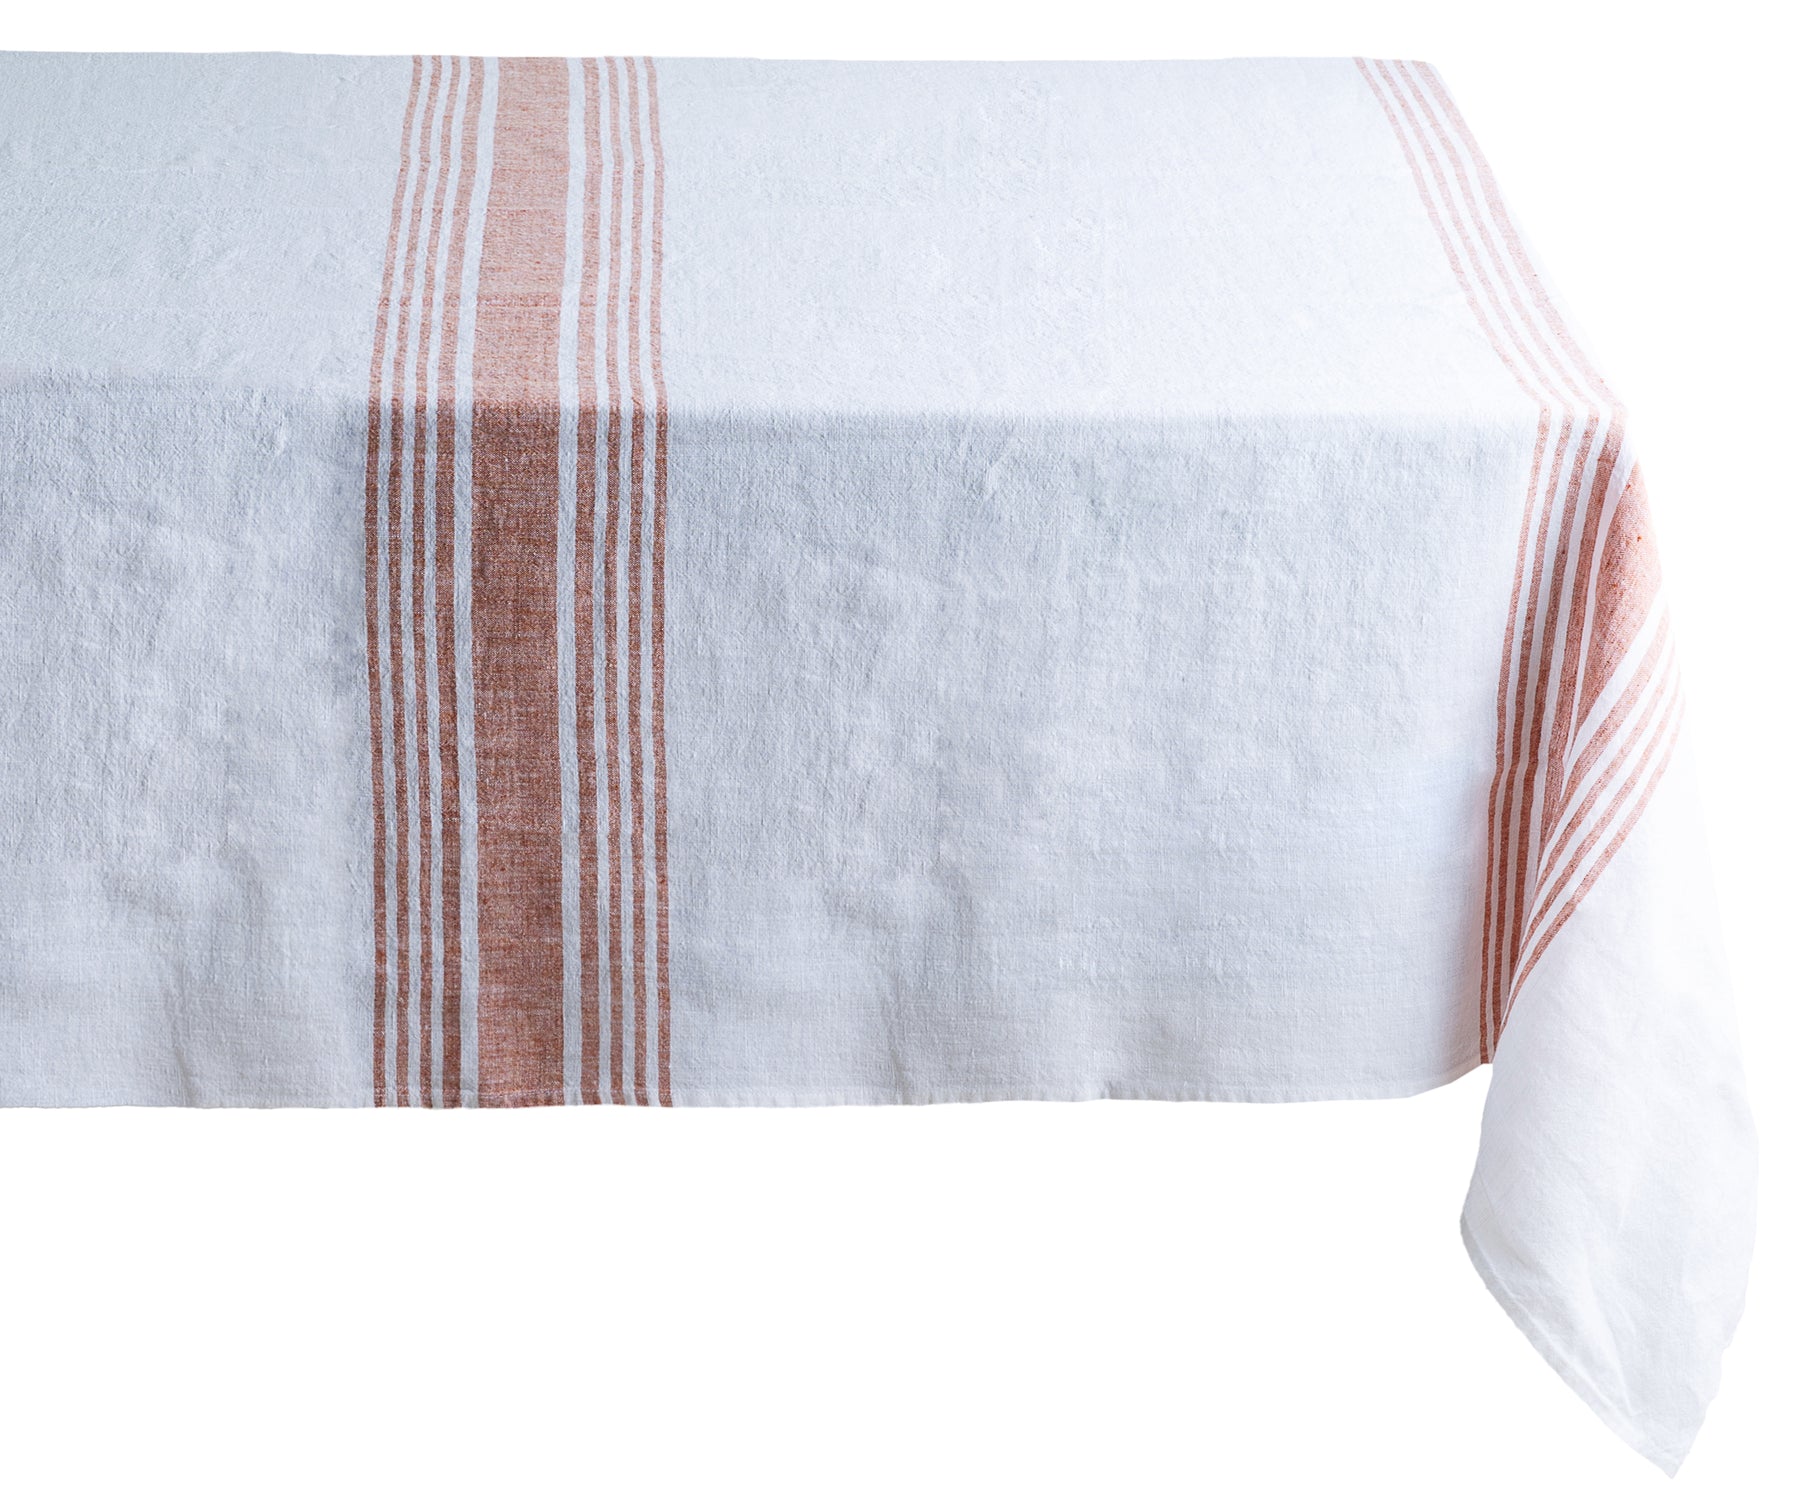 White linen tablecloth accented with tasteful red stripes